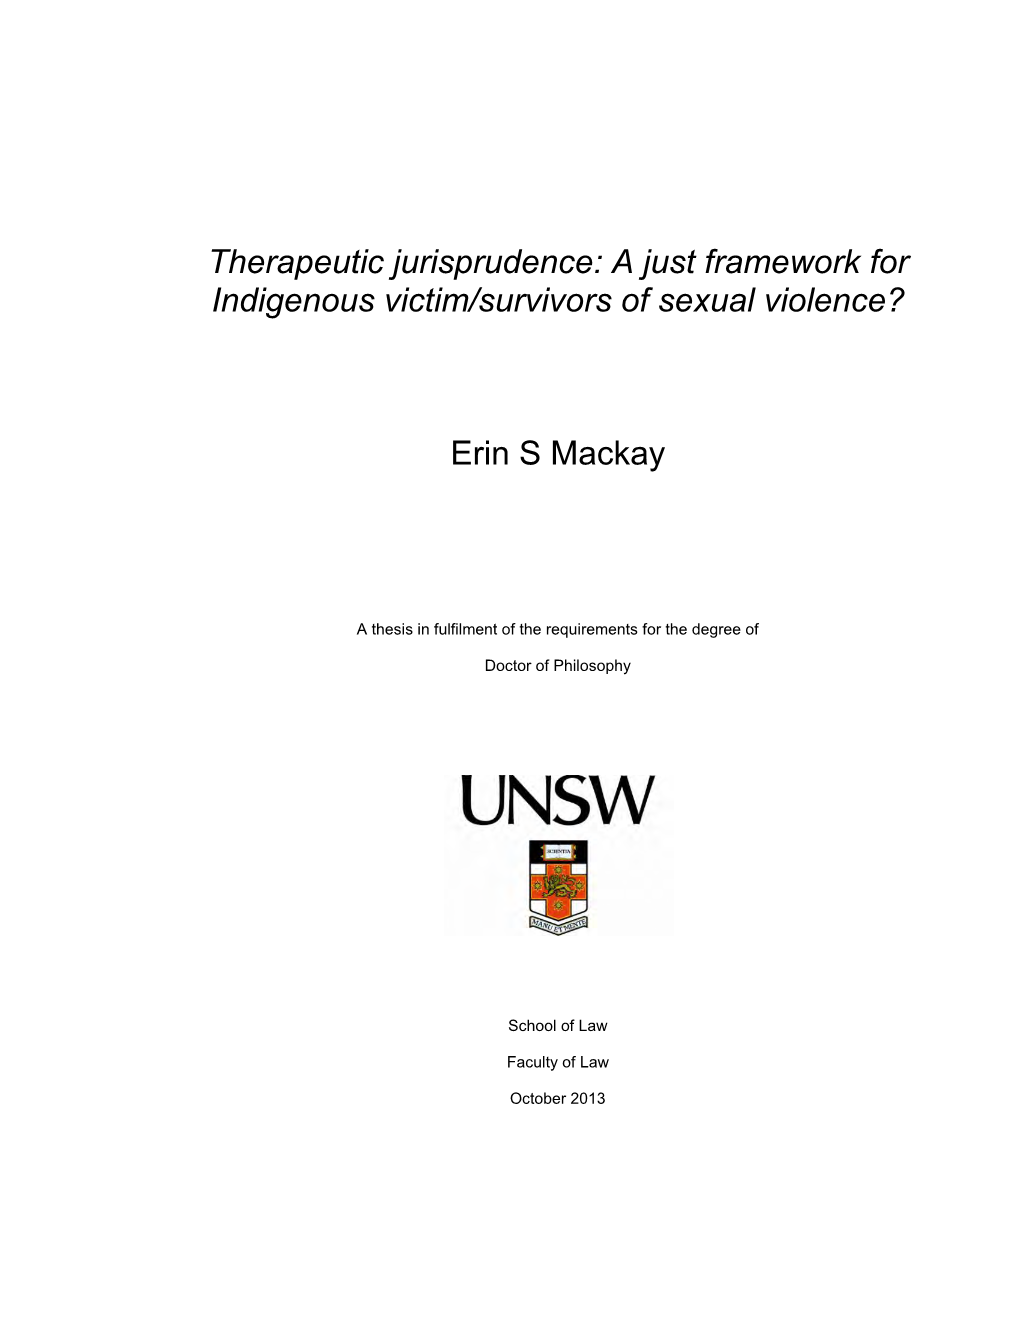 Therapeutic Jurisprudence: a Just Framework for Indigenous Victim/Survivors of Sexual Violence?